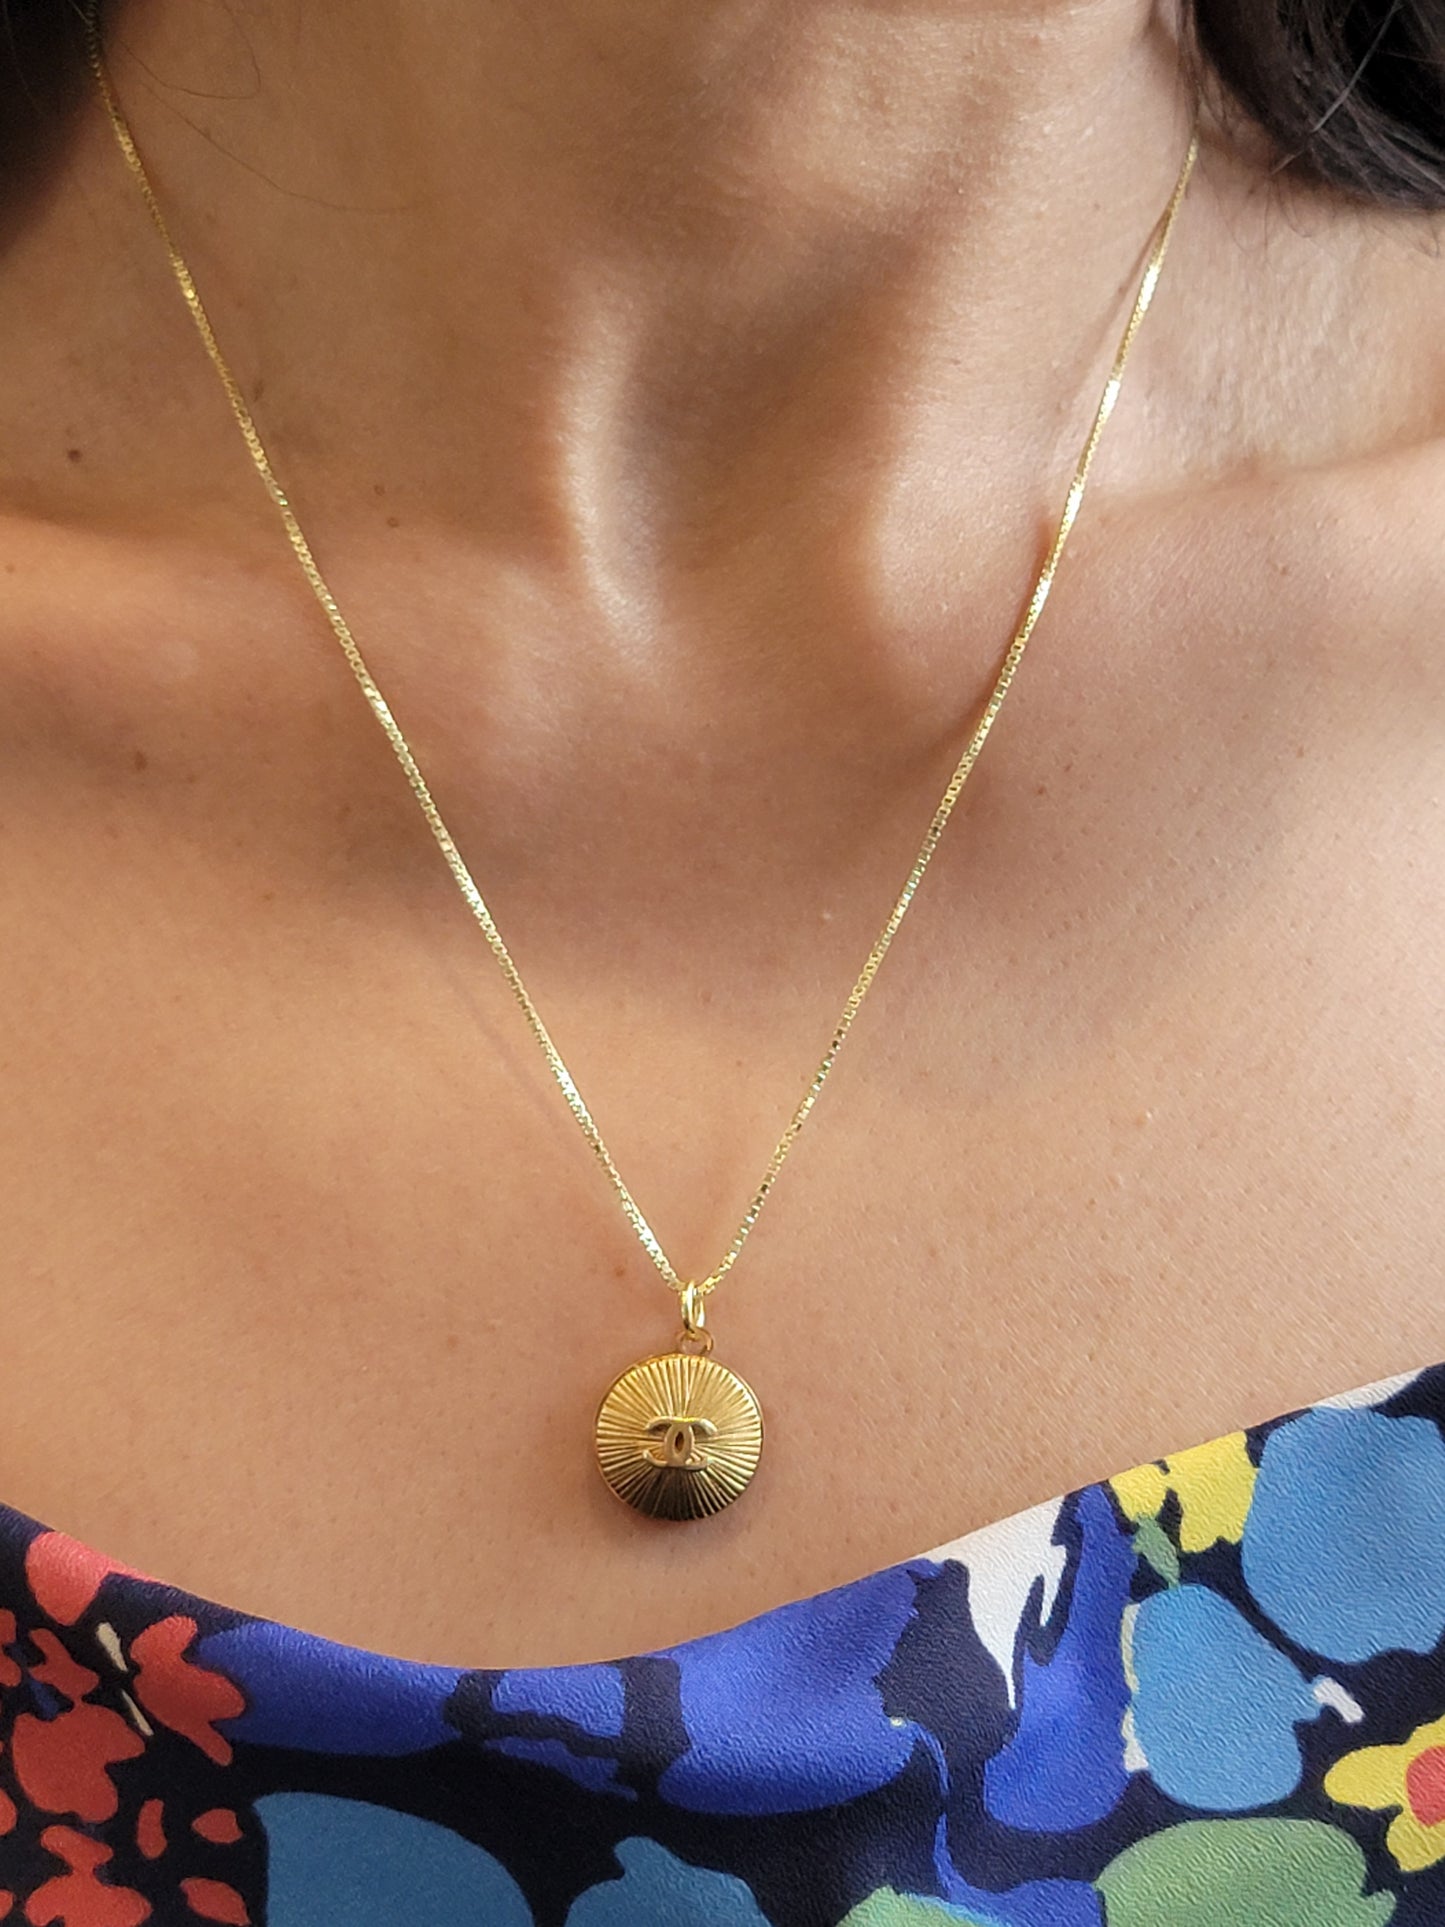 GOLD ON GOLD RAY CHANEL VINTAGE BUTTON NECKLACE